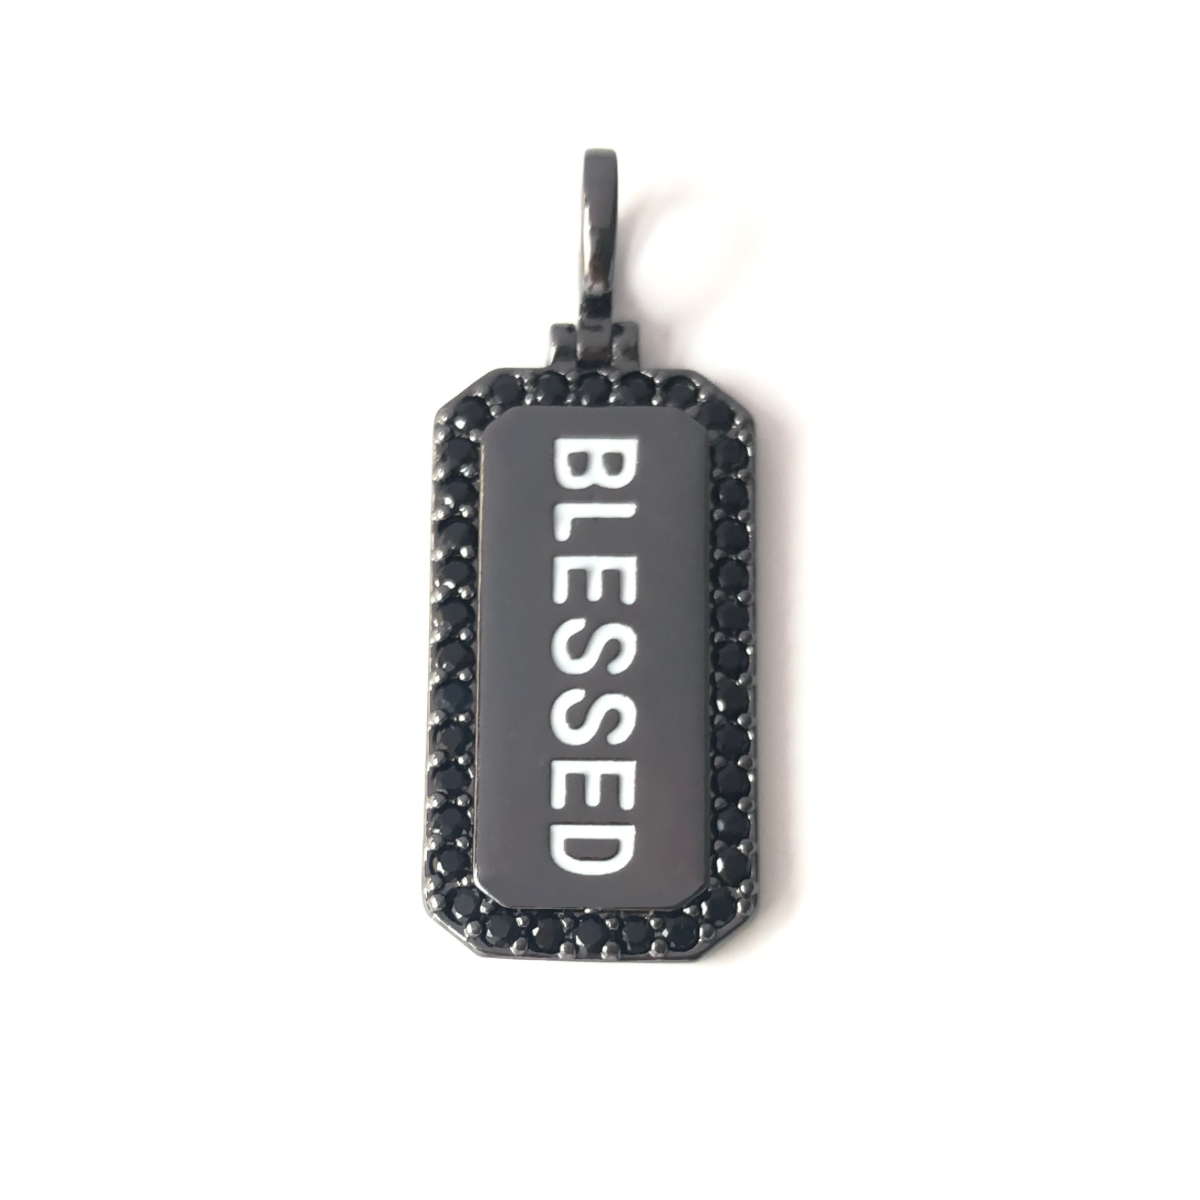 10pcs/lot 38*15mm CZ Paved Blessed Word Tags Charms Pendants Black on Black CZ Paved Charms Christian Quotes New Charms Arrivals Word Tags Charms Beads Beyond